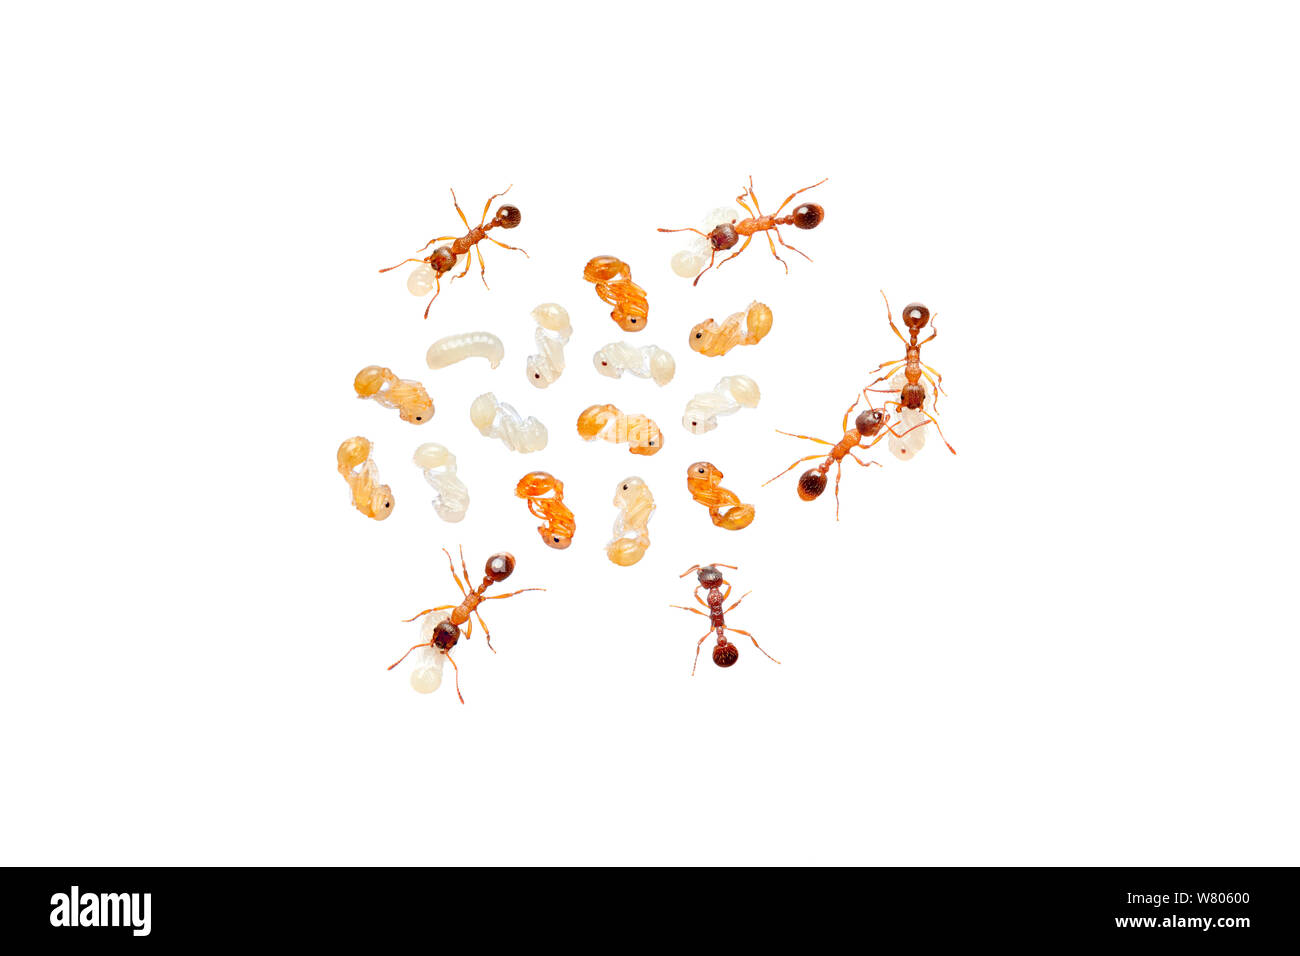 Red ant (Myrmica rubra) worker ants attending to larvae and pupae, Barnt Green, Worcestershire, England, UK, August. Stock Photo